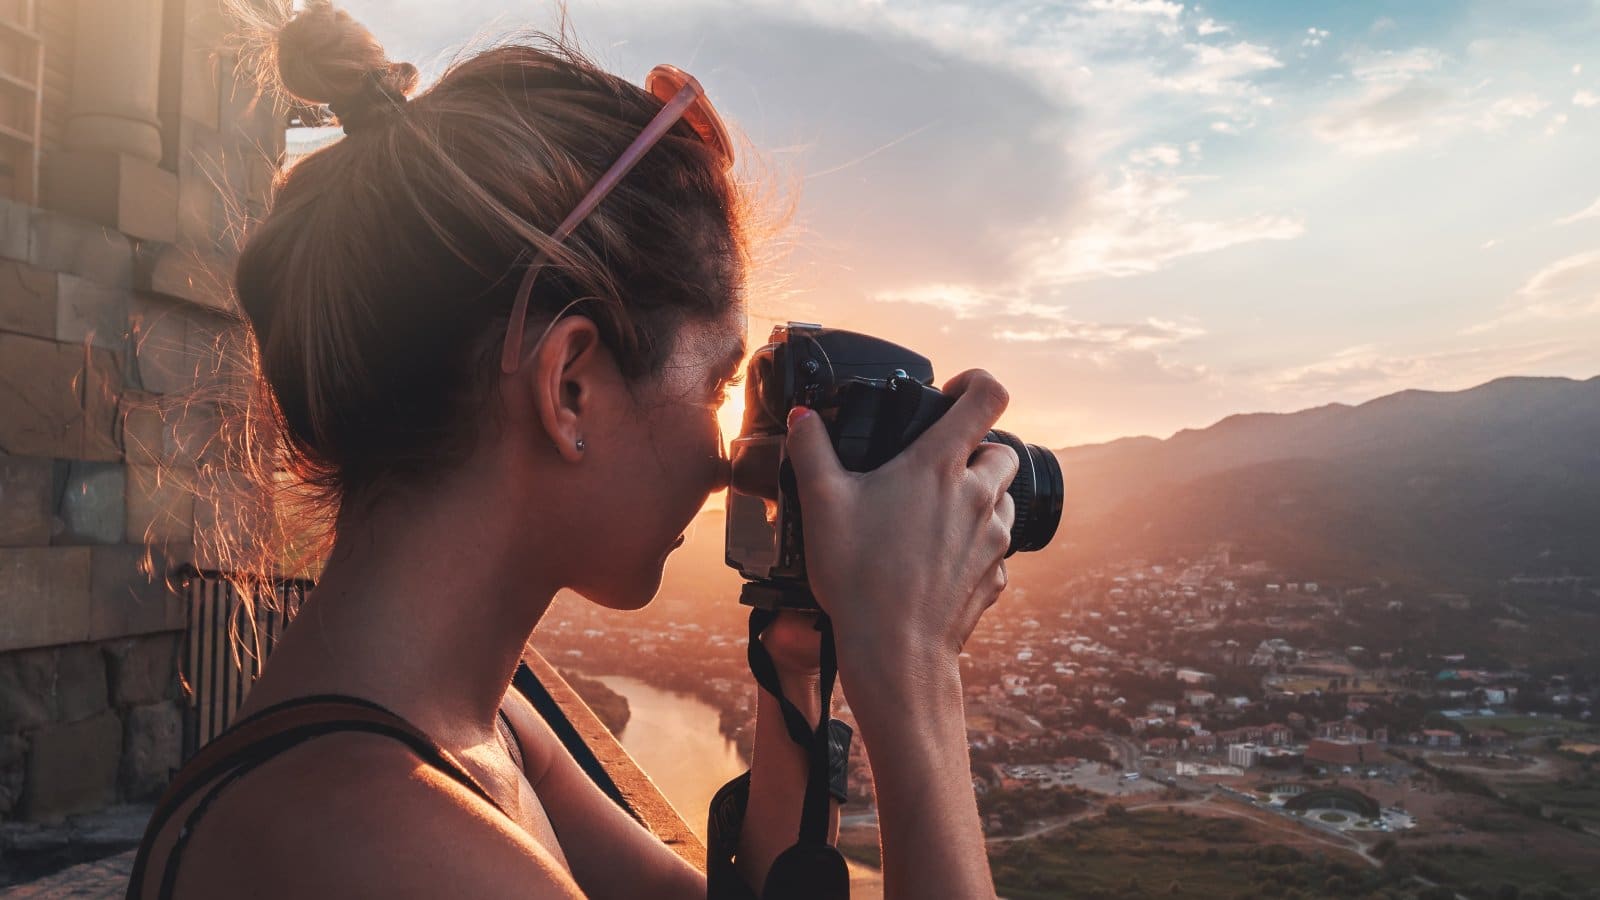 <p class="wp-caption-text">Image Credit: Shutterstock / RBstock</p>  <p><span>High-end travelers might opt for professional photography gear, while budget adventurers can create stunning photo journals using smartphones to capture the journey’s best moments.</span></p>